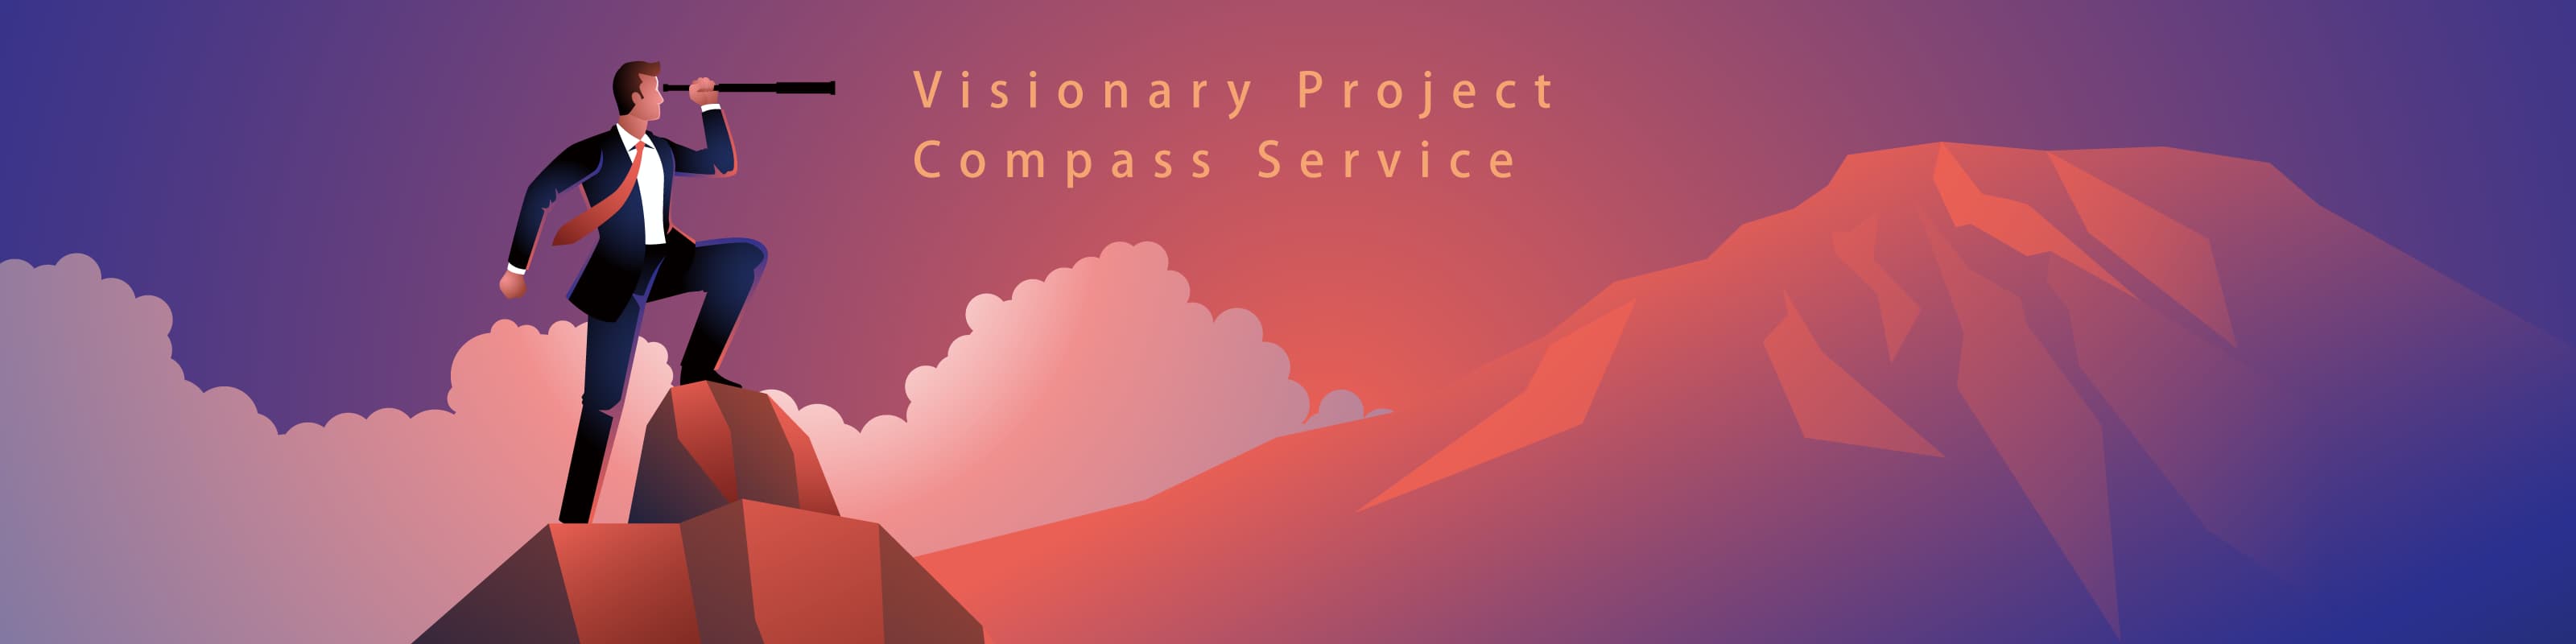 Visionary Project Compass Service by ASCADE